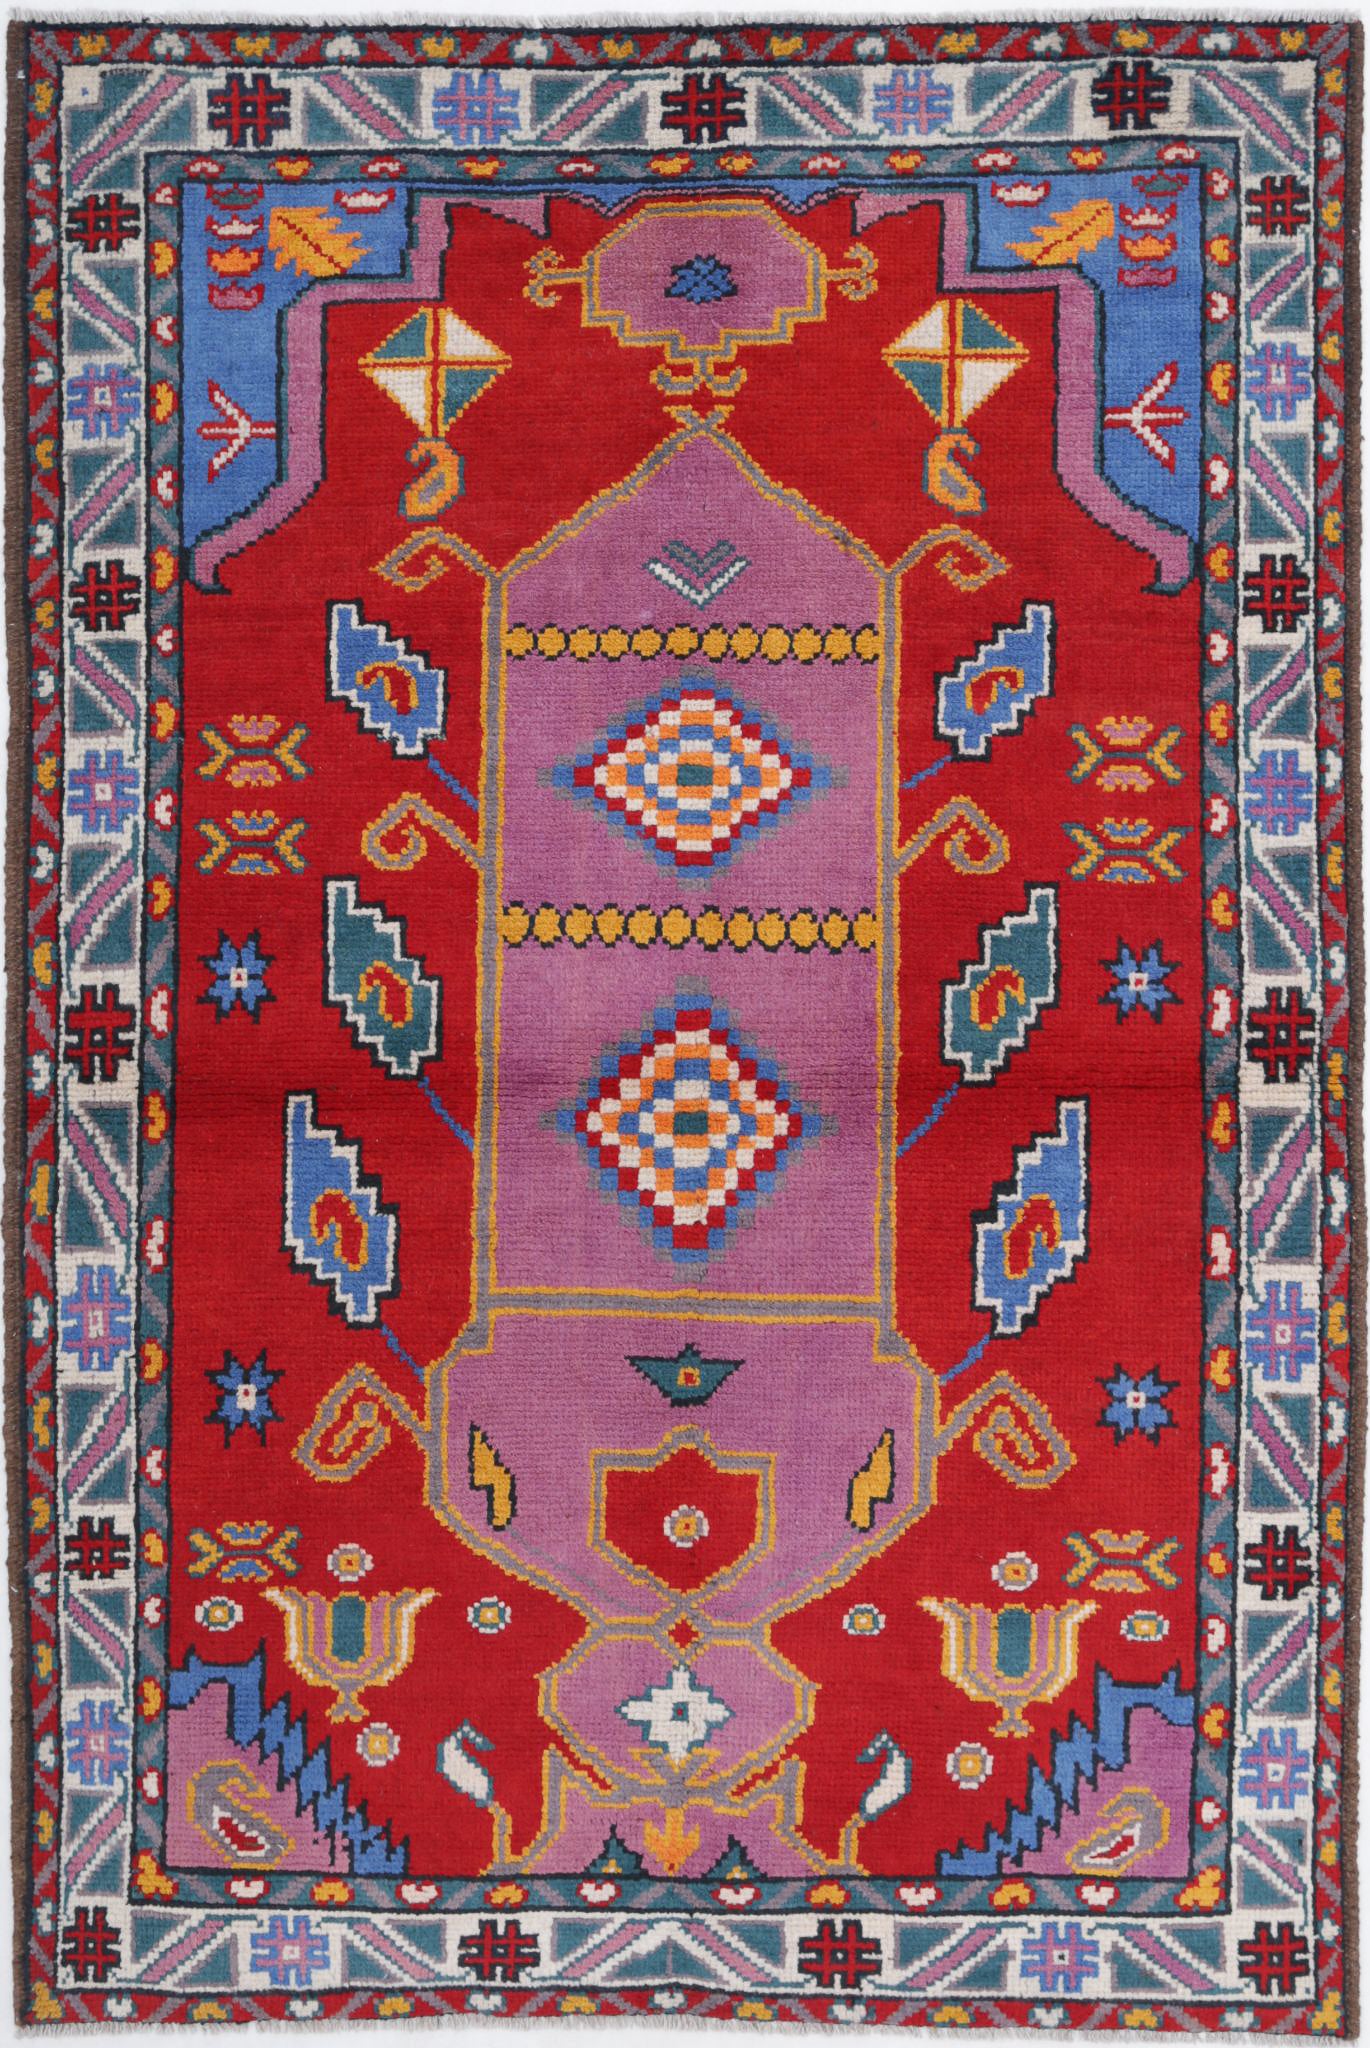 Revival-hand-knotted-qarghani-wool-rug-5014068.jpg